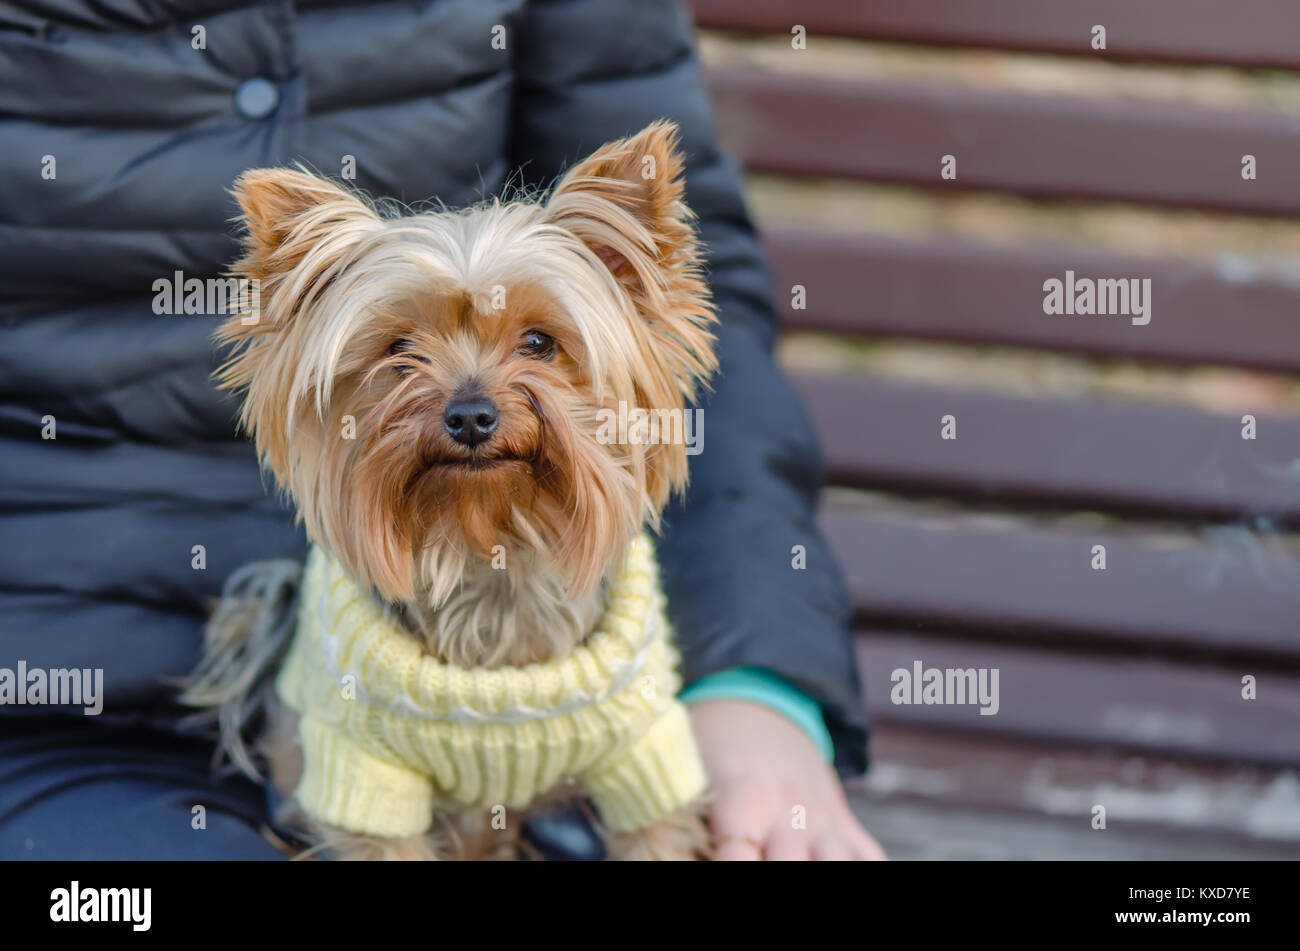 Sits, an animal with a man. Pedigree, decorative dog, brownish red, shaggy, with a thick long coat Stock Photo